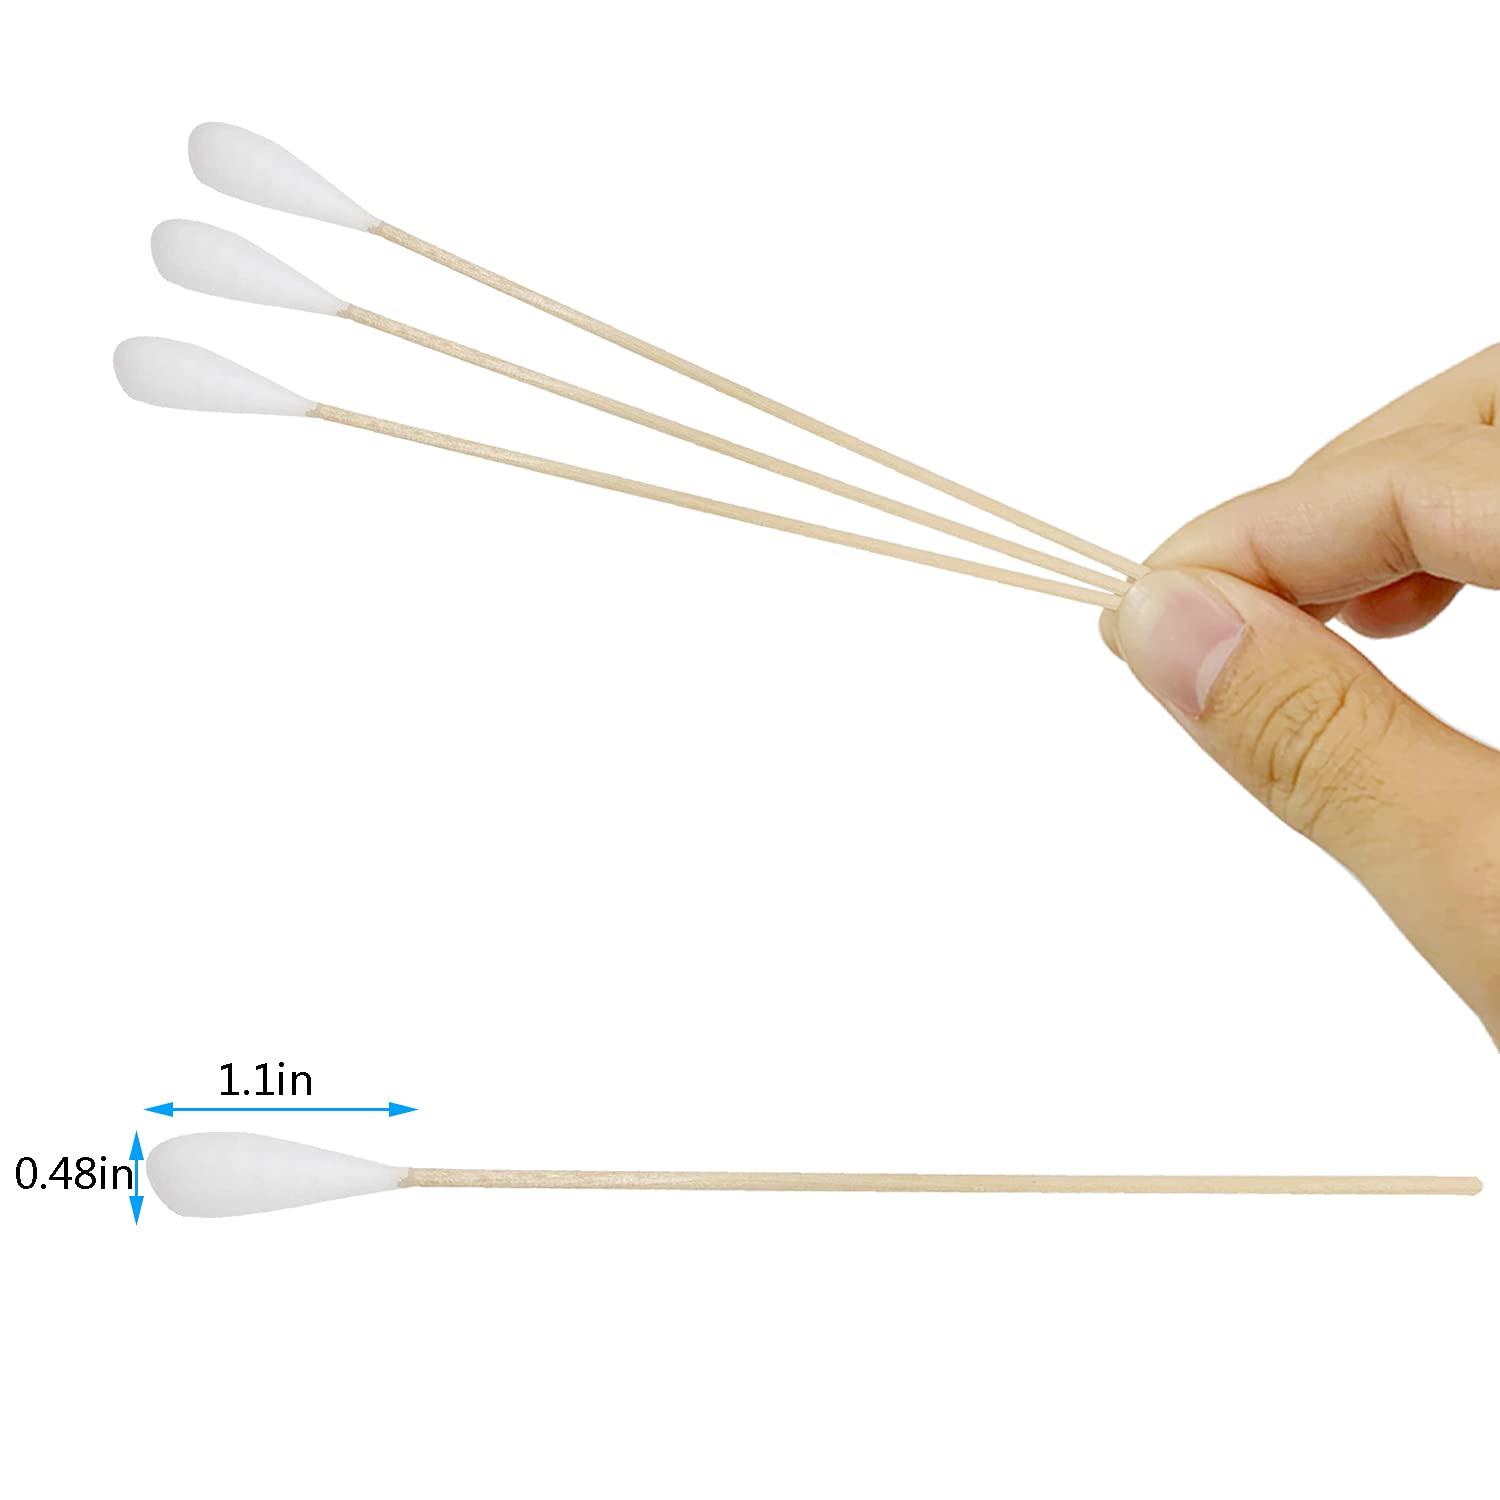 6 Long Cotton Swabs 400pcs for Makeup, Gun Cleaning or Pets Care